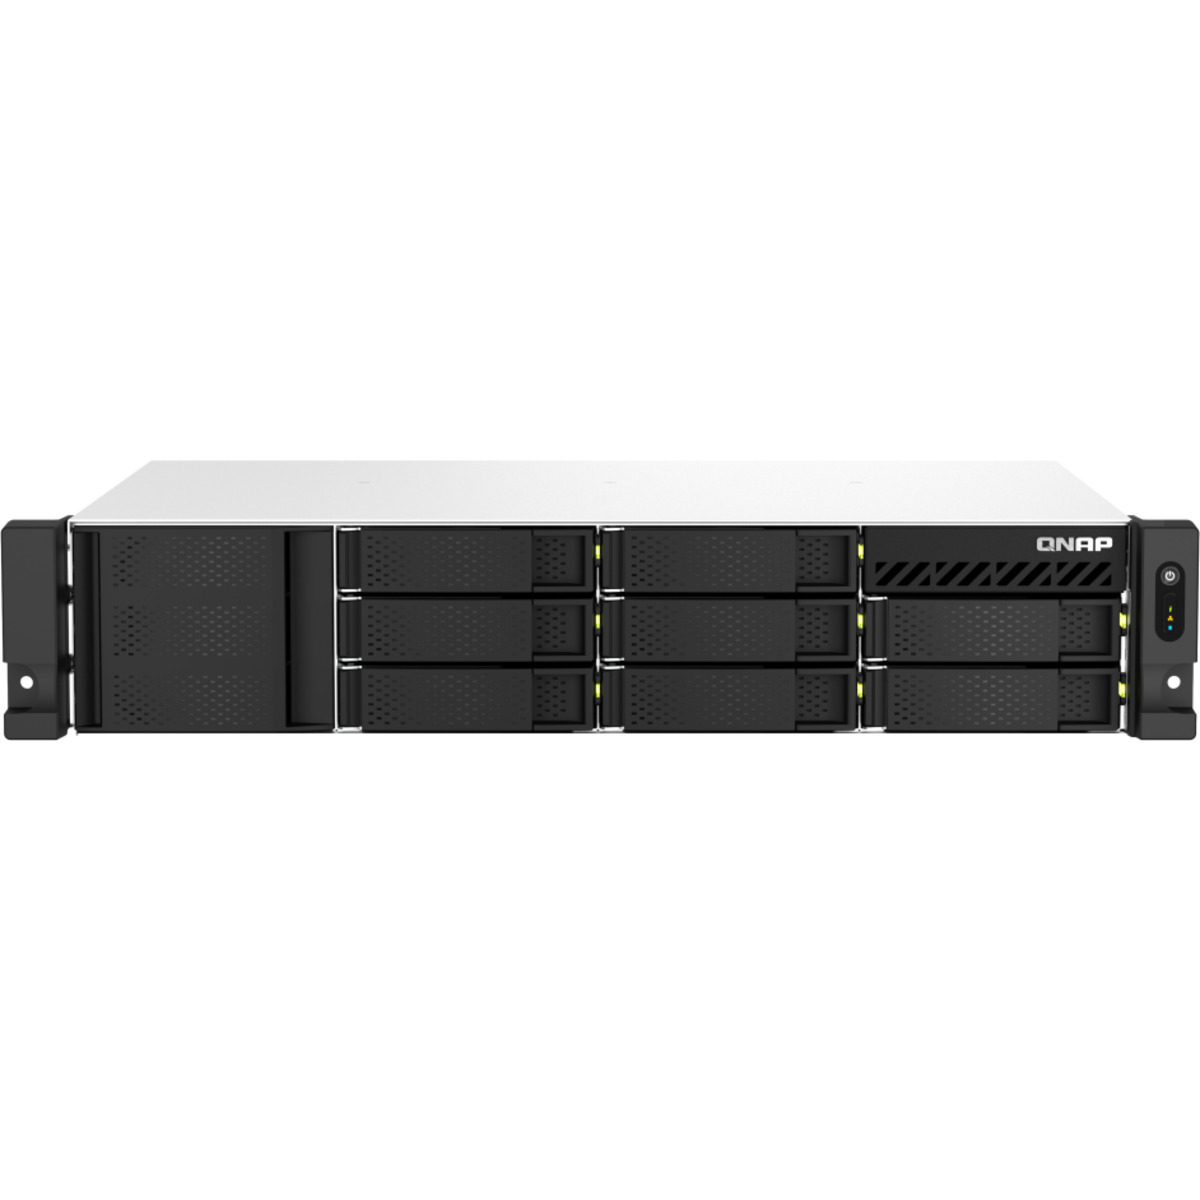 QNAP TS-873AeU-RP 144tb 8-Bay RackMount Multimedia / Power User / Business NAS - Network Attached Storage Device 6x24tb Seagate IronWolf Pro ST24000NT002 3.5 7200rpm SATA 6Gb/s HDD NAS Class Drives Installed - Burn-In Tested - FREE RAM UPGRADE TS-873AeU-RP